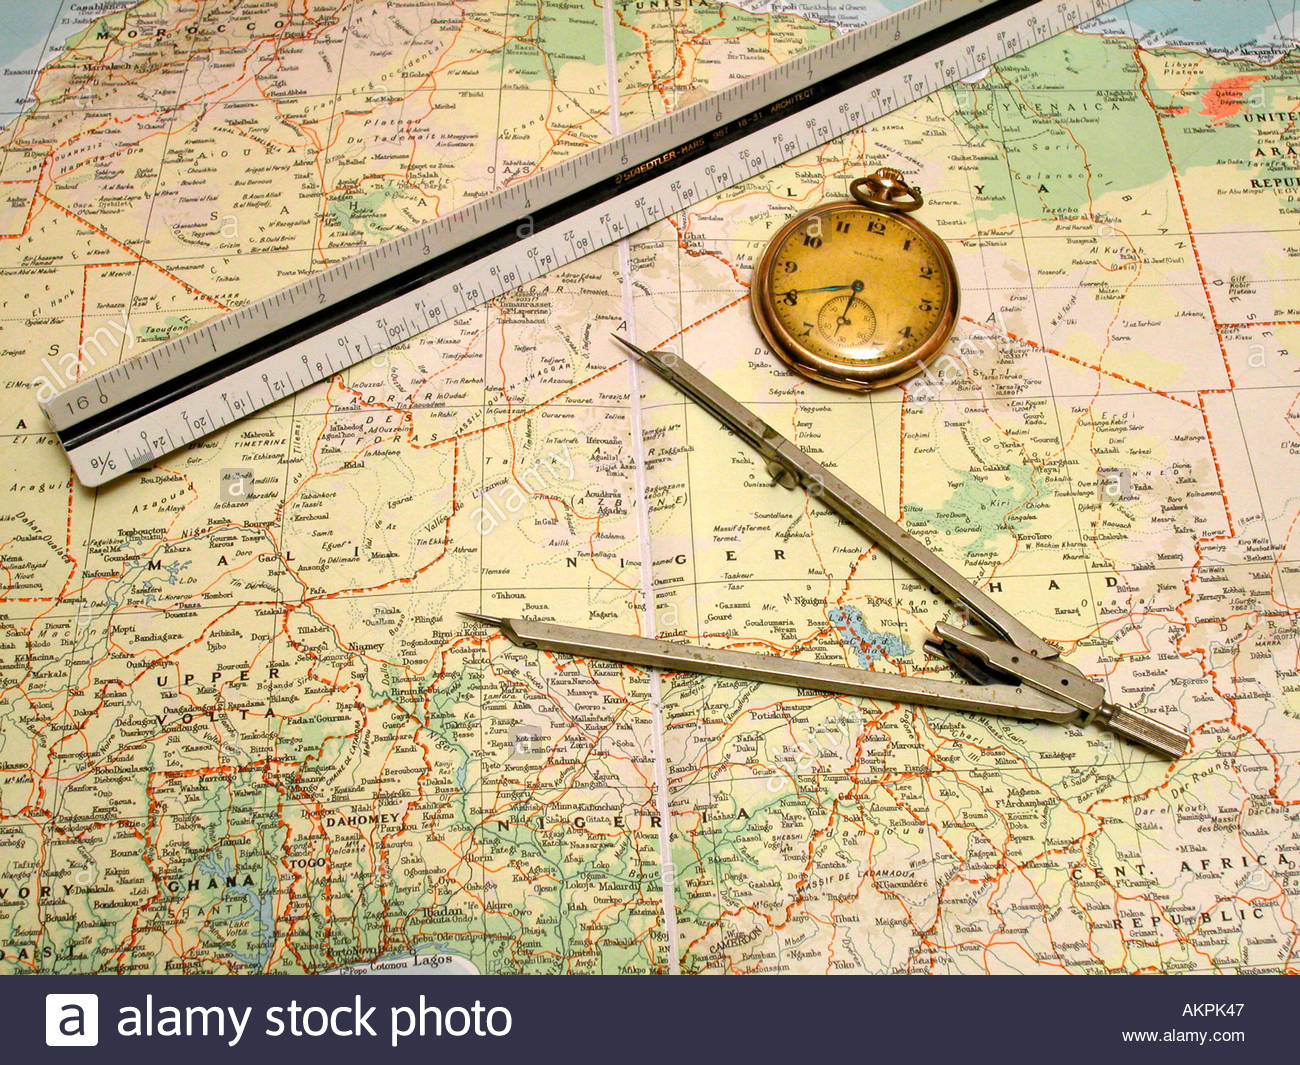 Old Map With Navigation Tools AKPK47 